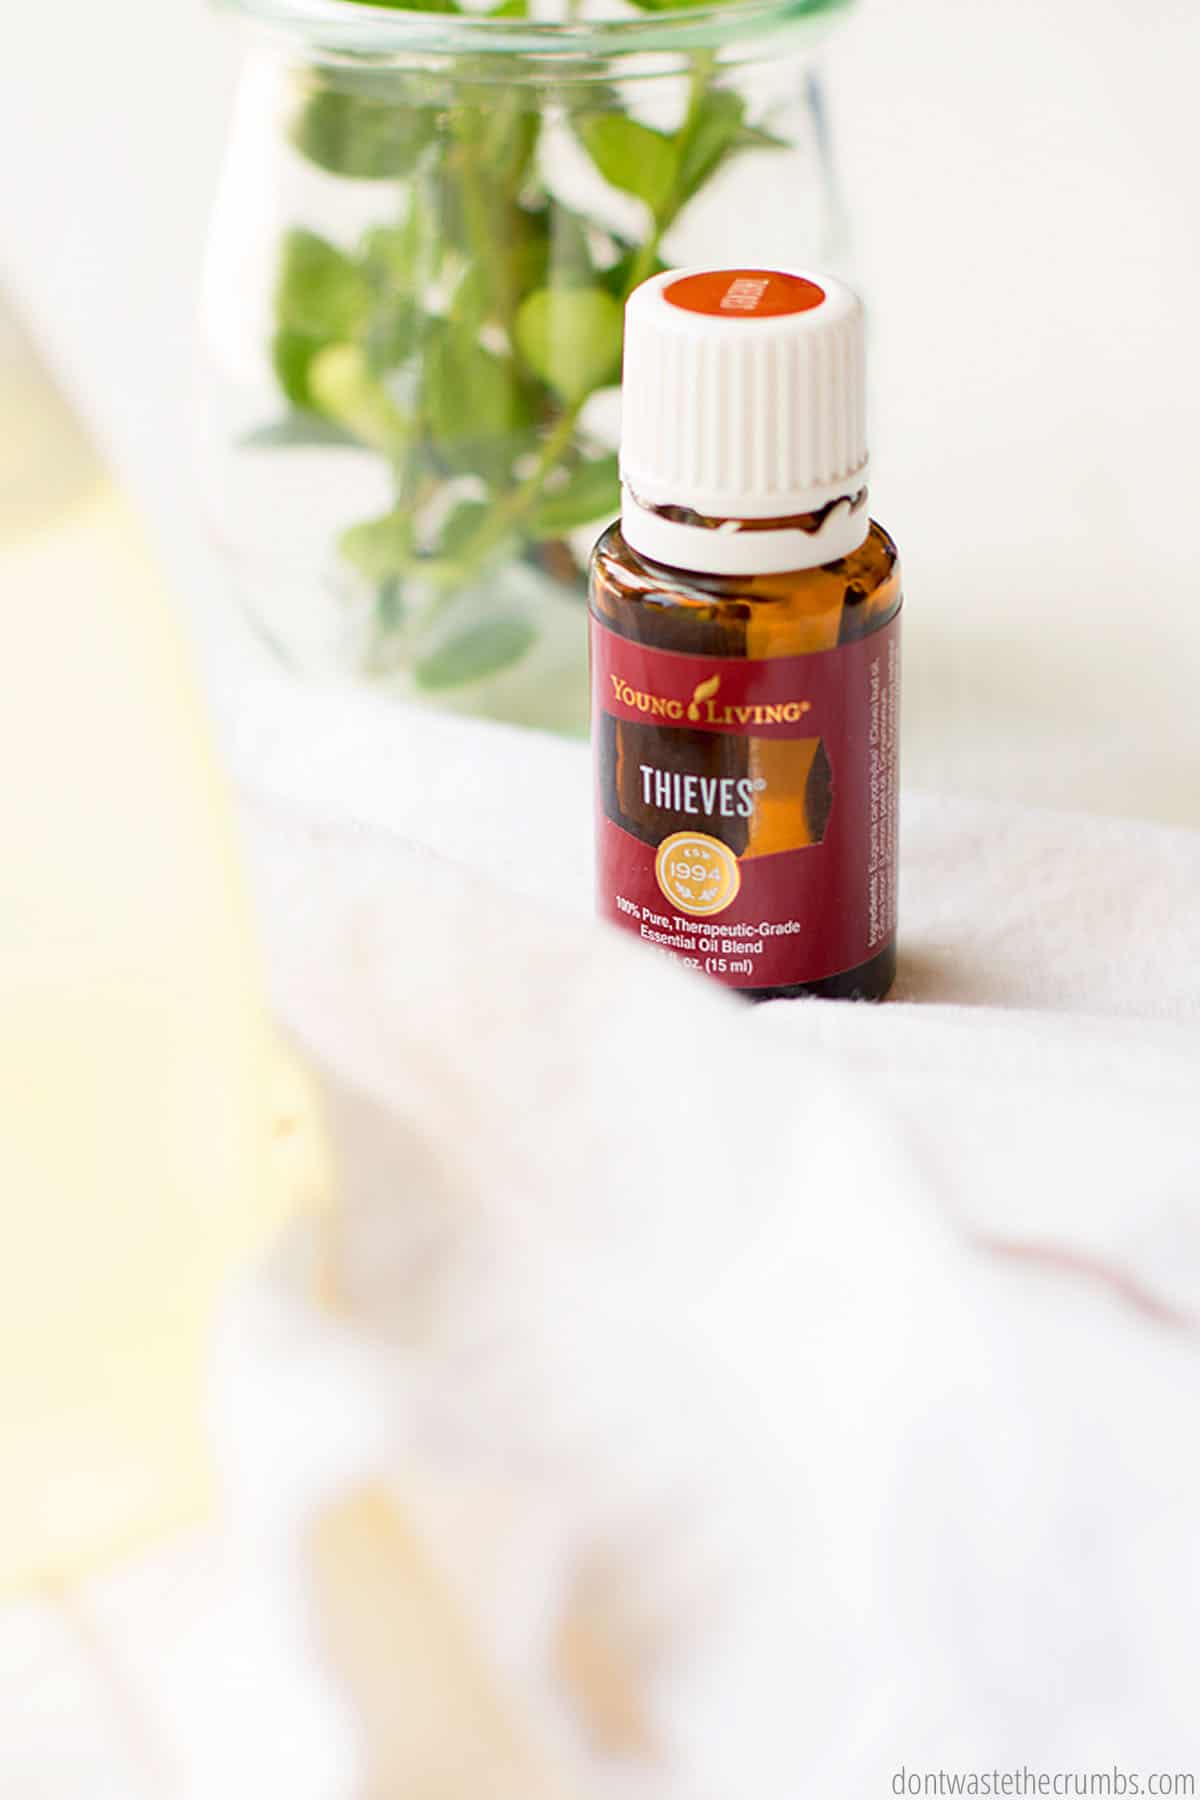 A small bottle of Young Living Thieves essential oil on a table beside a vase with a leafy green plant inside.